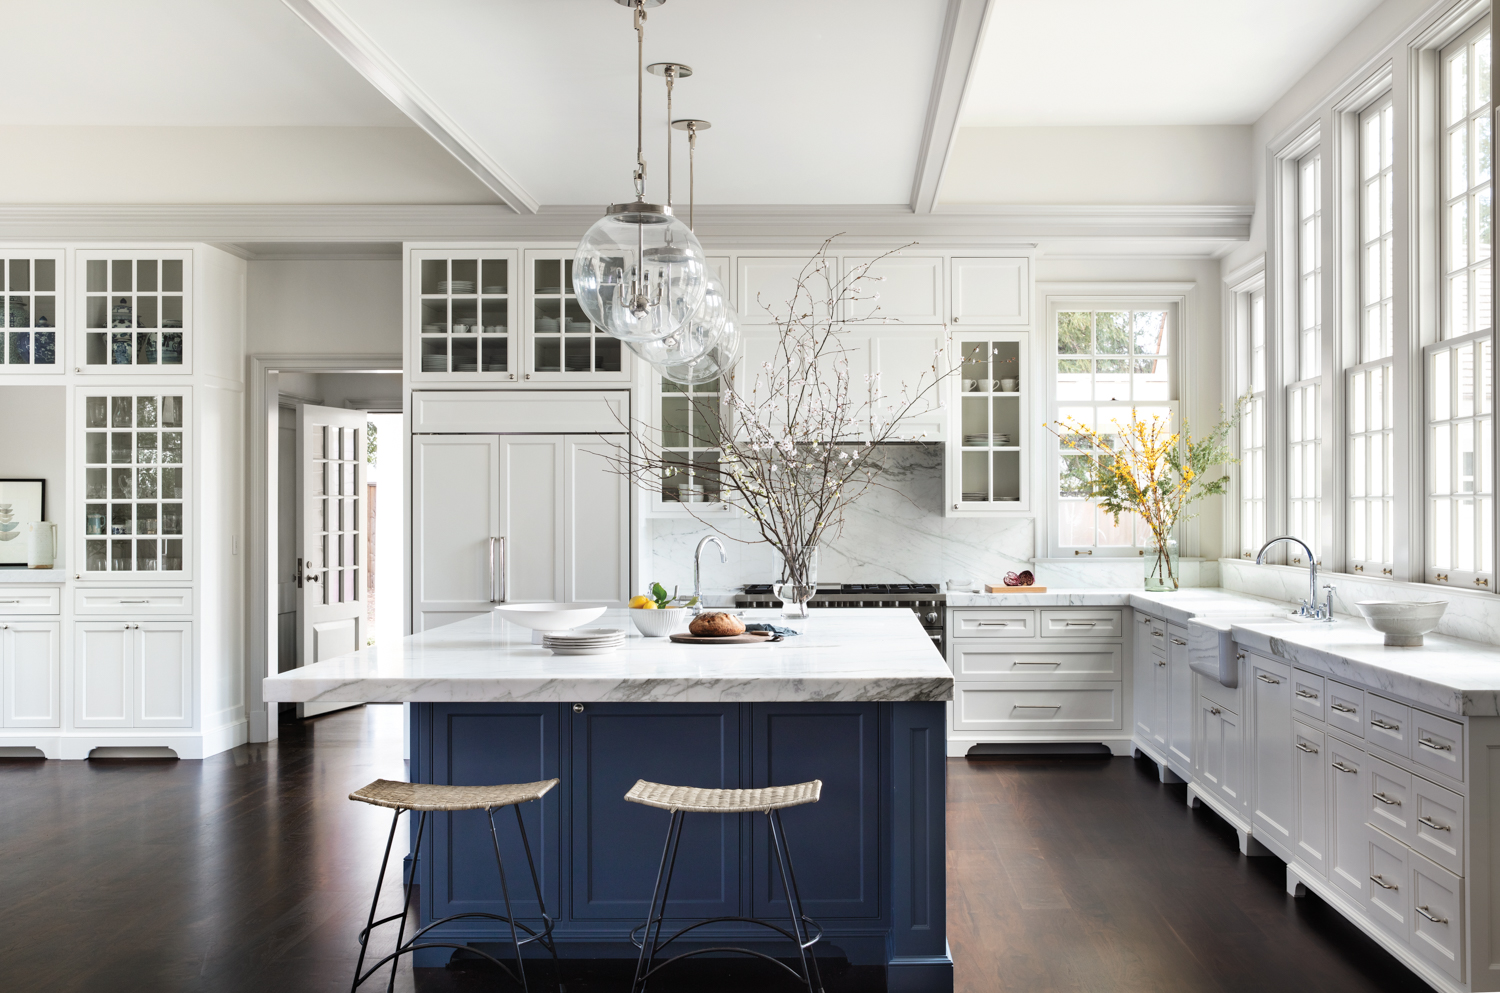 A blue kitchen island is in an otherwise white kitchen.